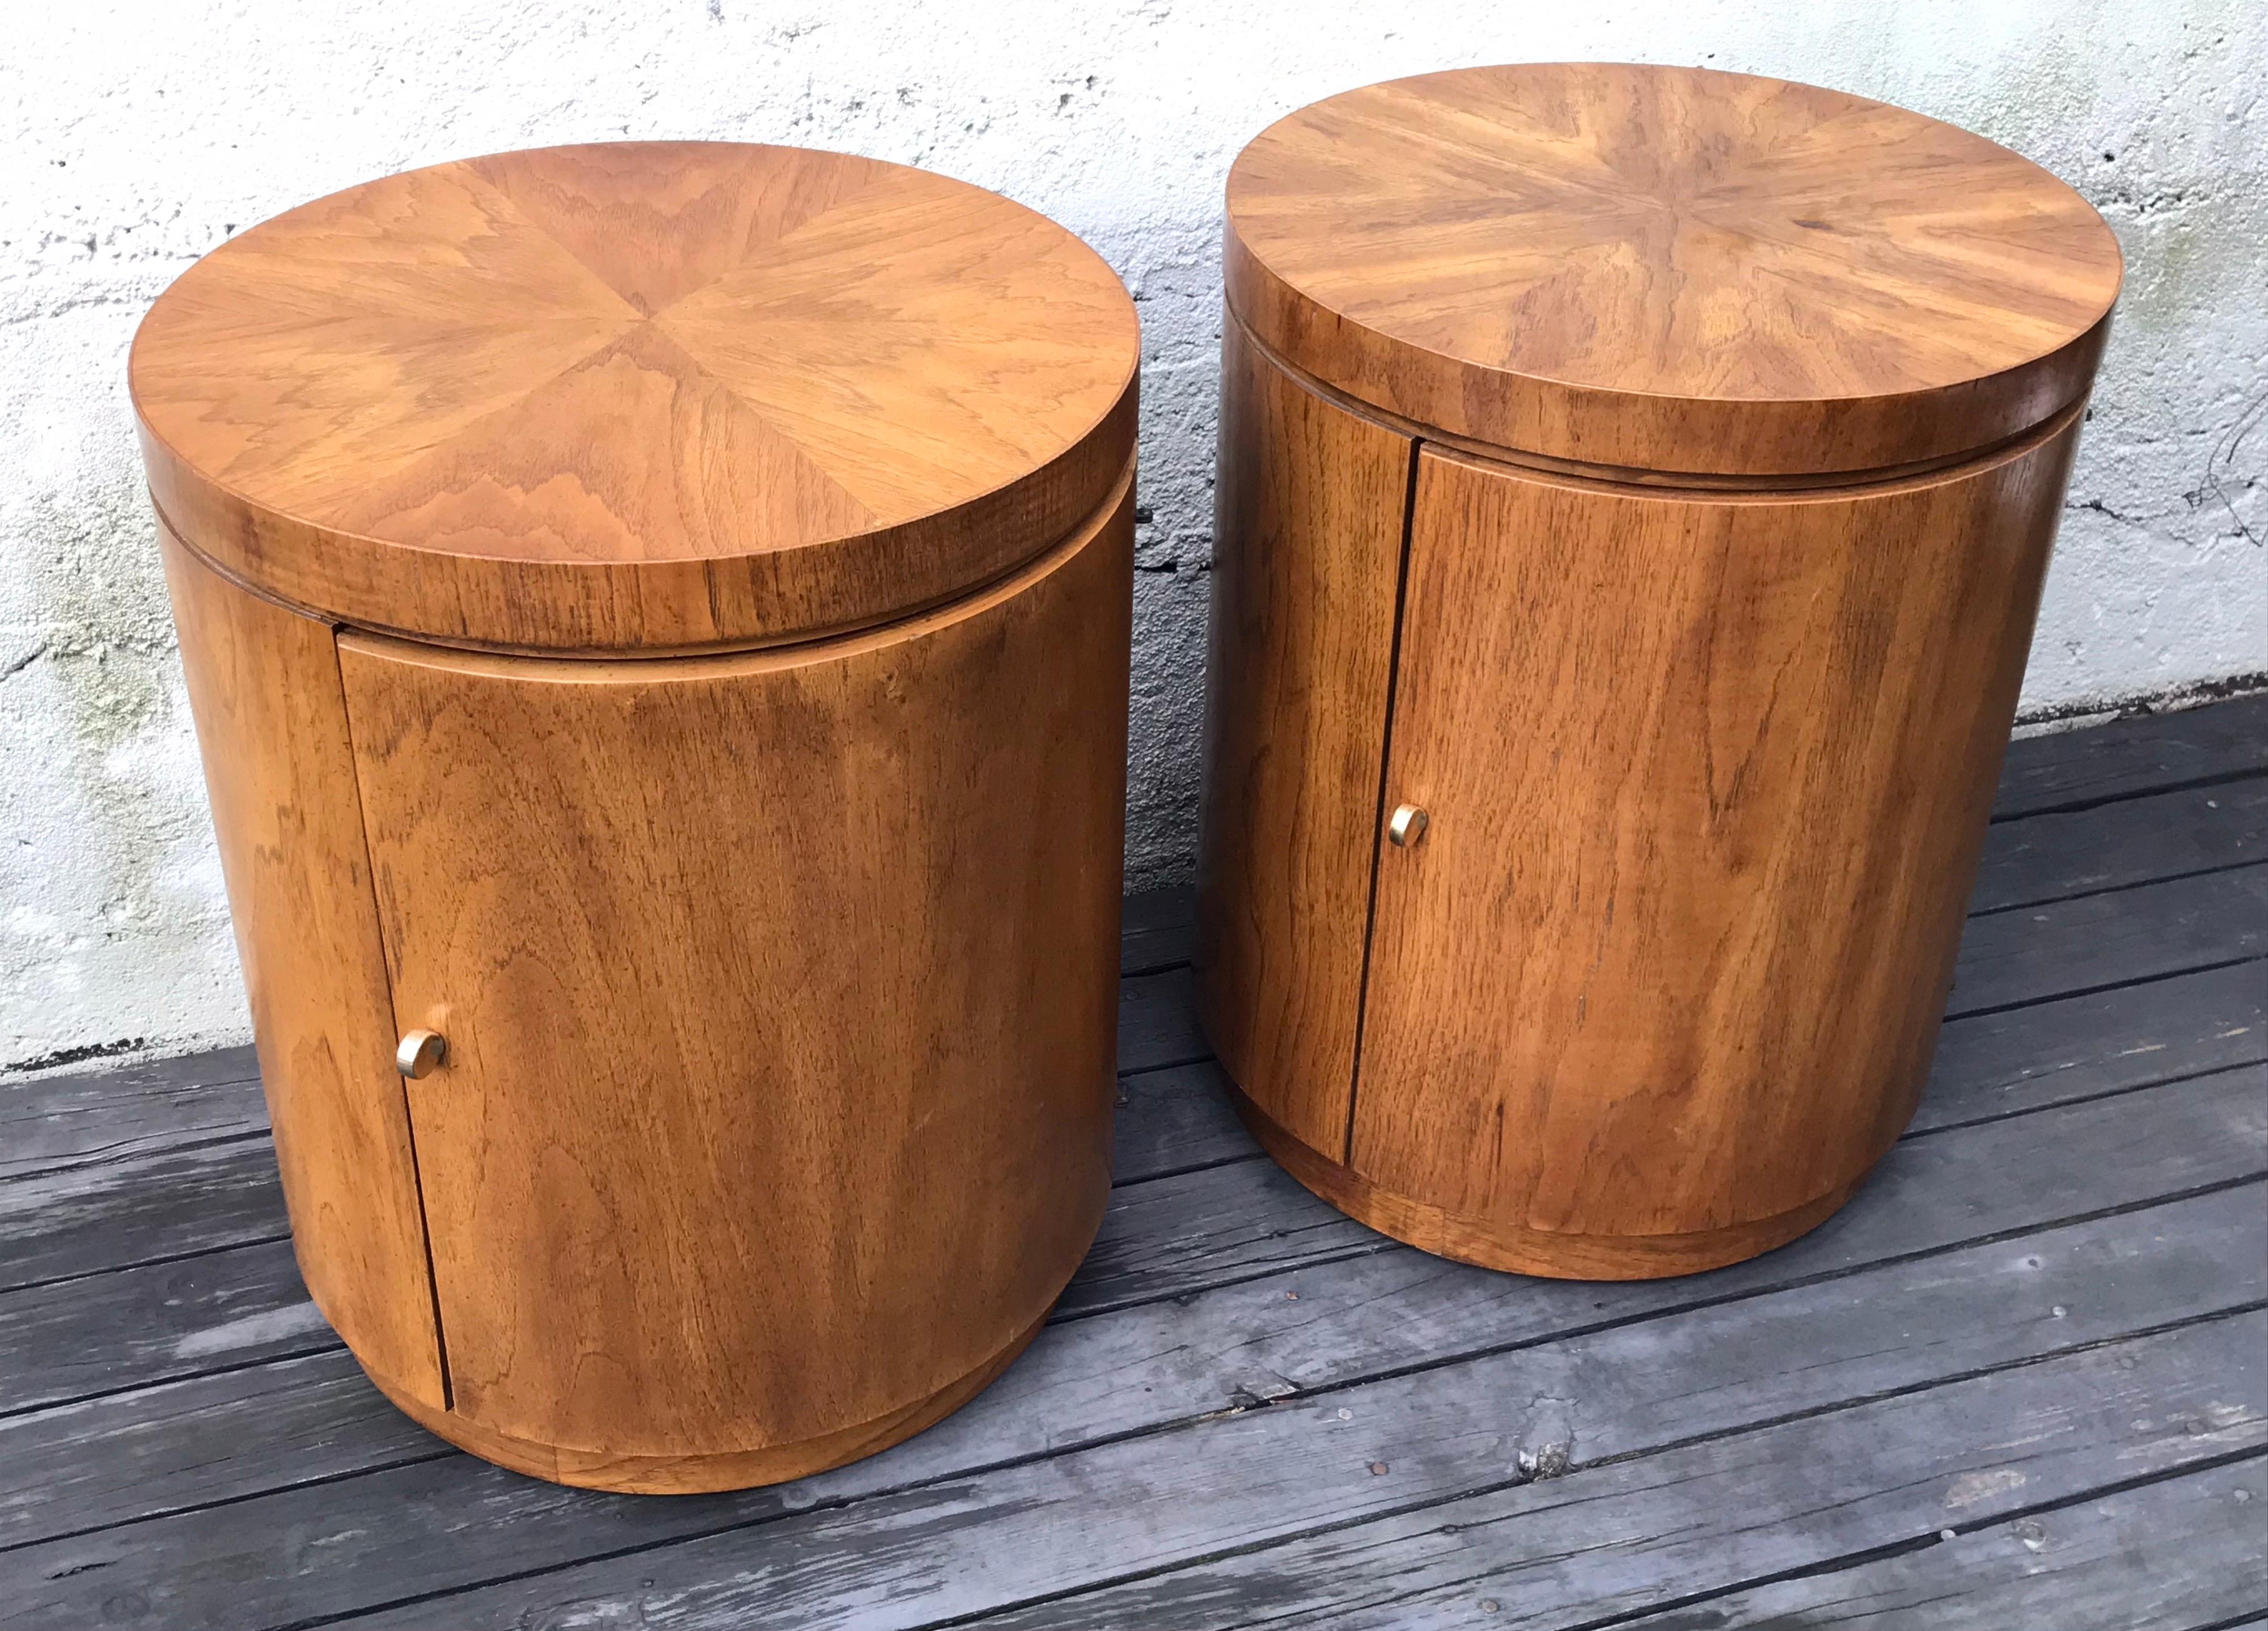 Nice pair of mid century tubular round side tables by Drexel. Faux burled maple finish with brass door pulls.
Minor veneer loss at bottom edges and minor fading at one backside, please see photos.